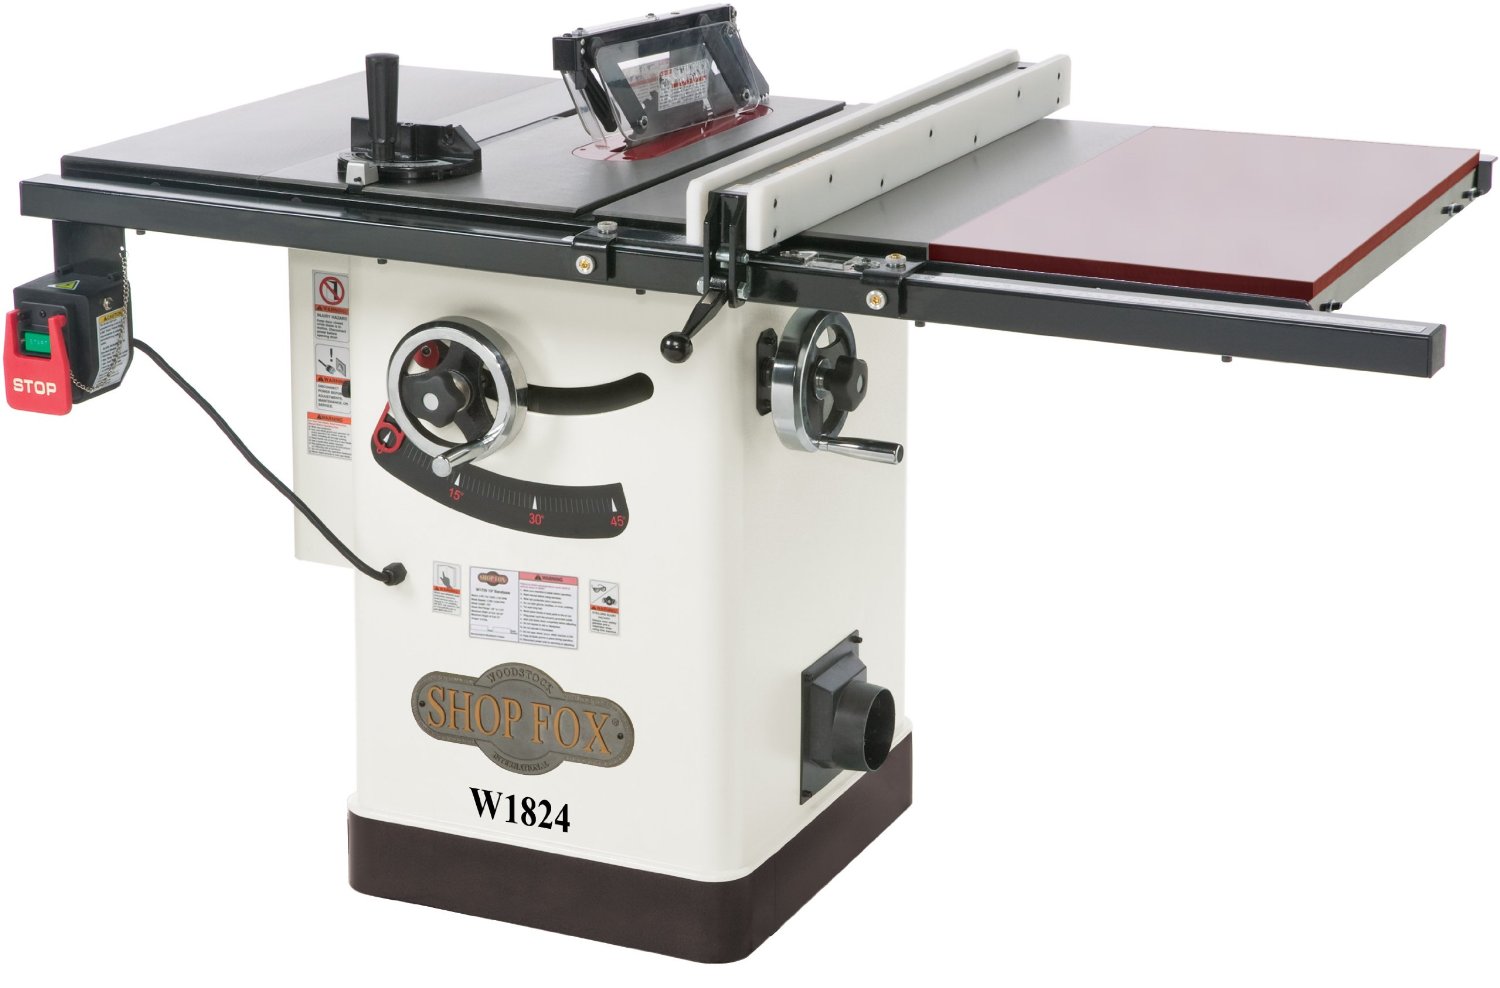 Hybrid Table Saw Reviews - The Basic Woodworking